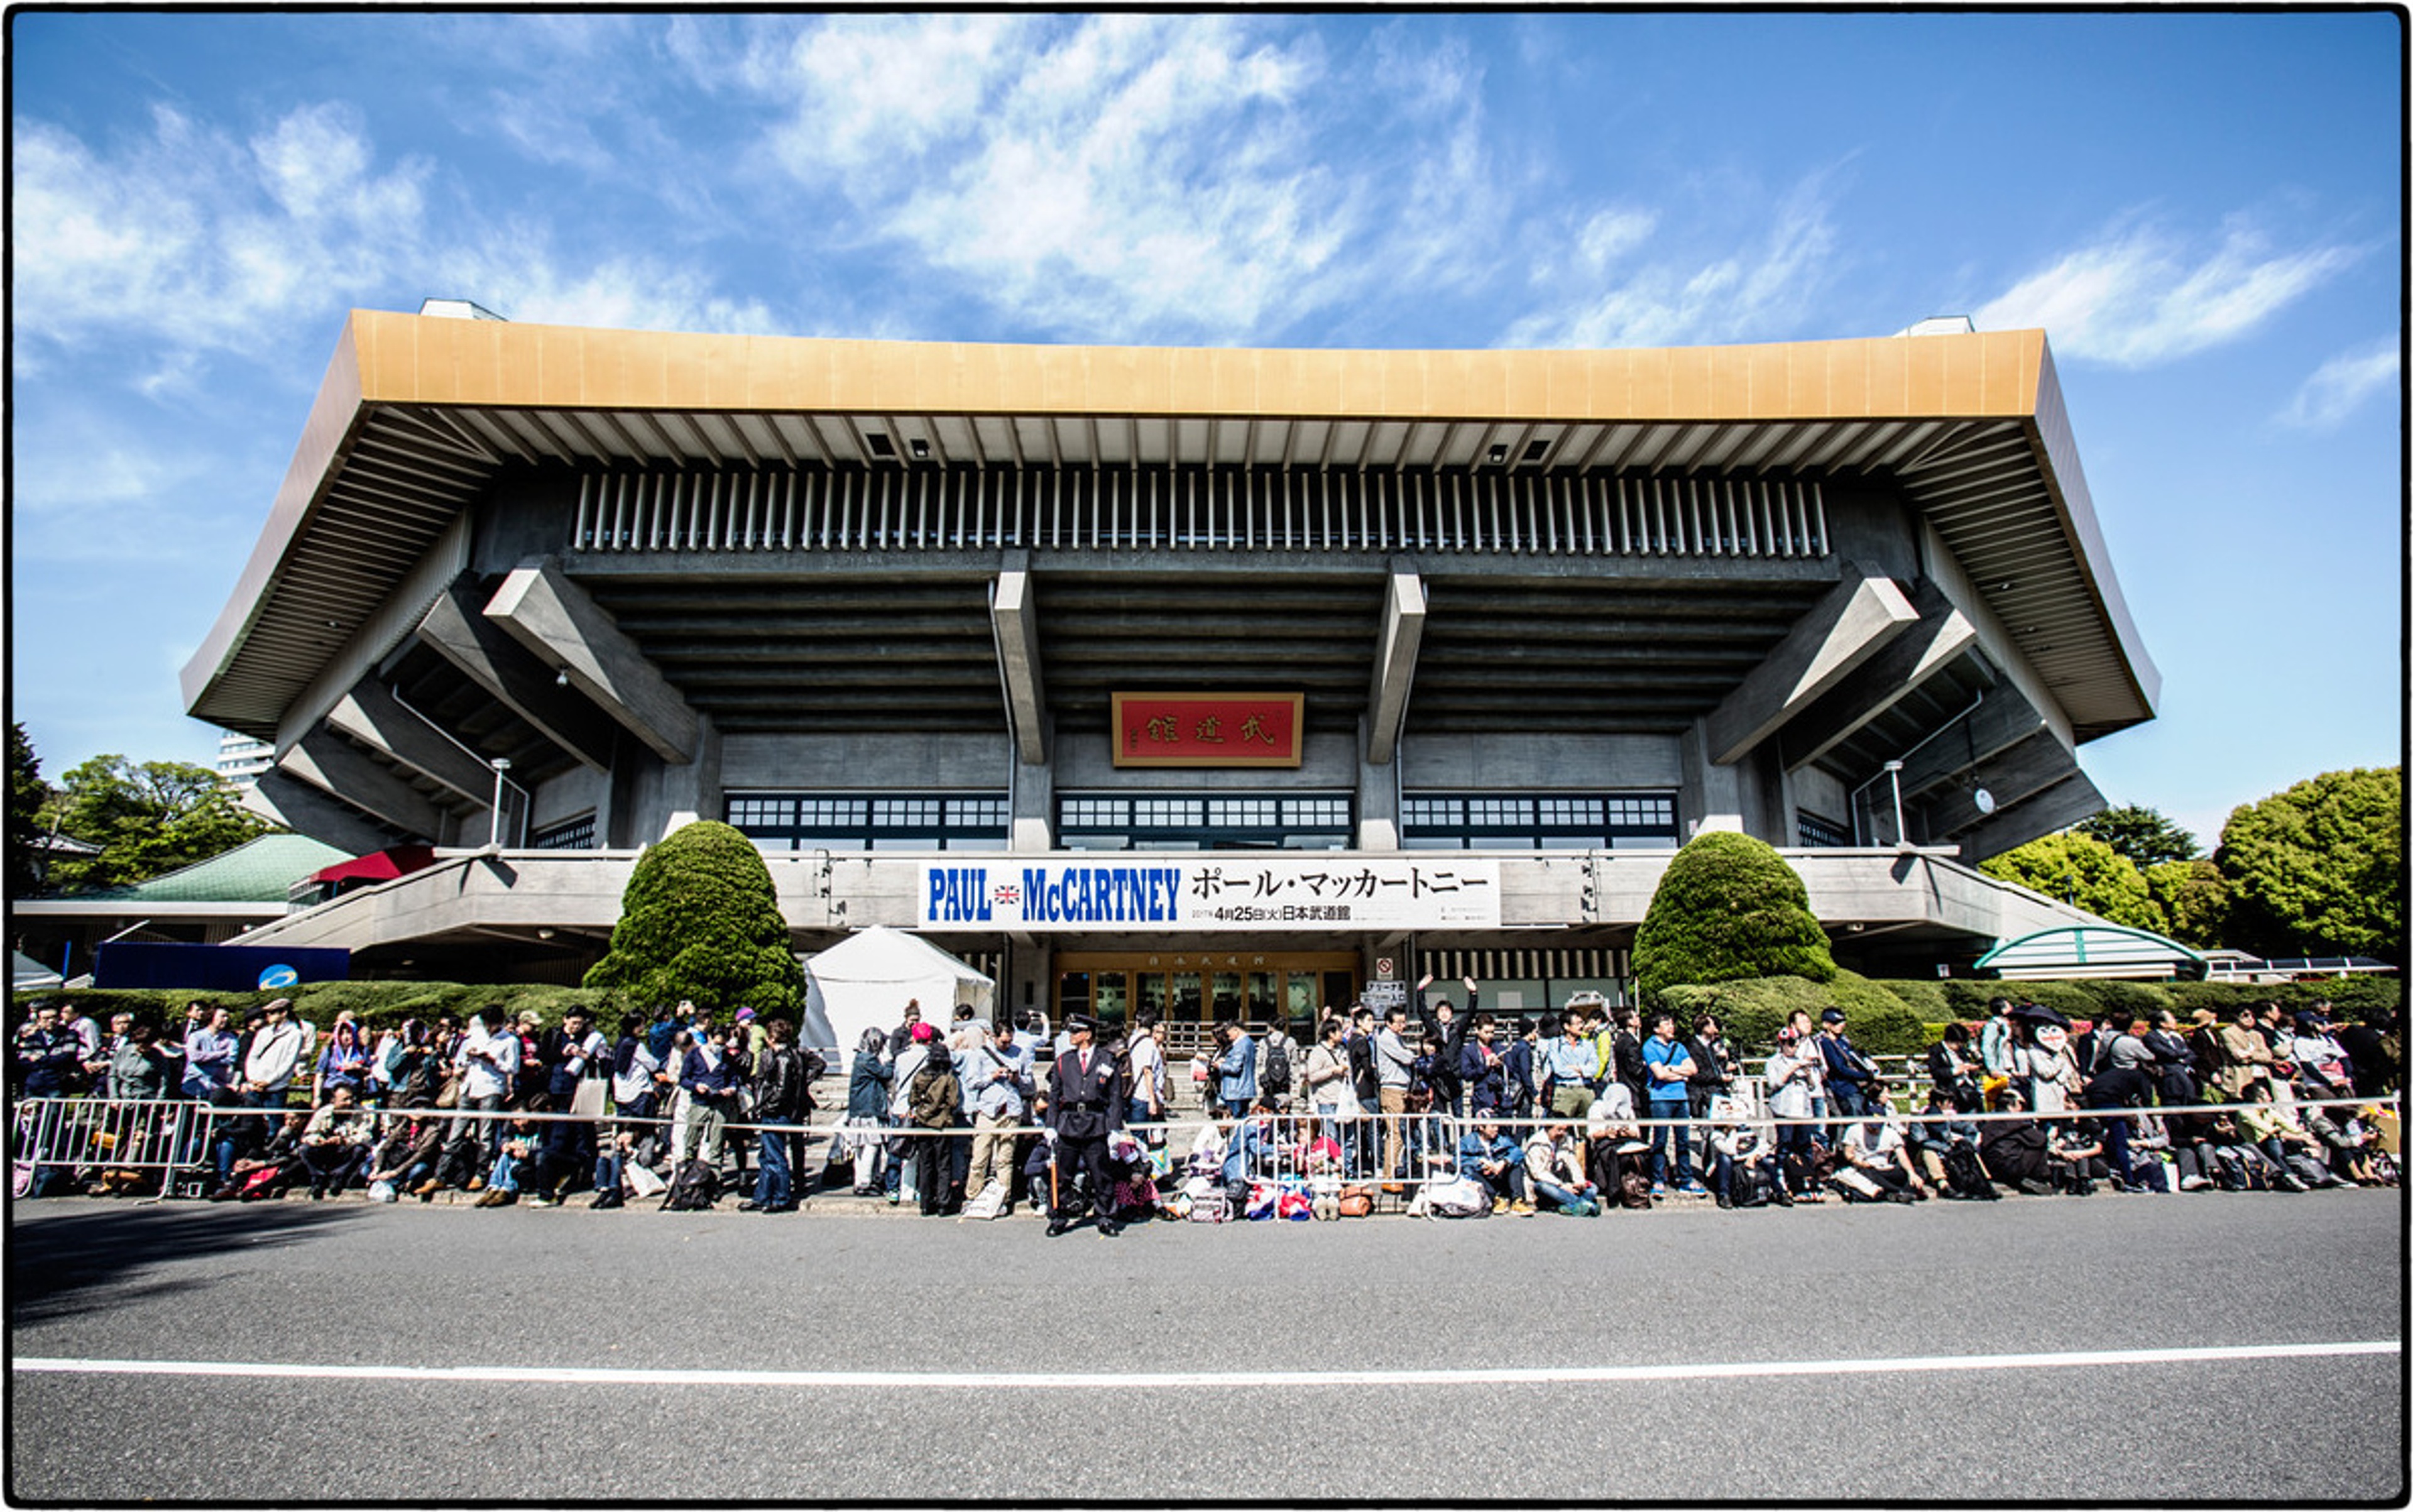 Fans queue outside The Budokan ahead of Paul’s sold out show, 25th April 2017